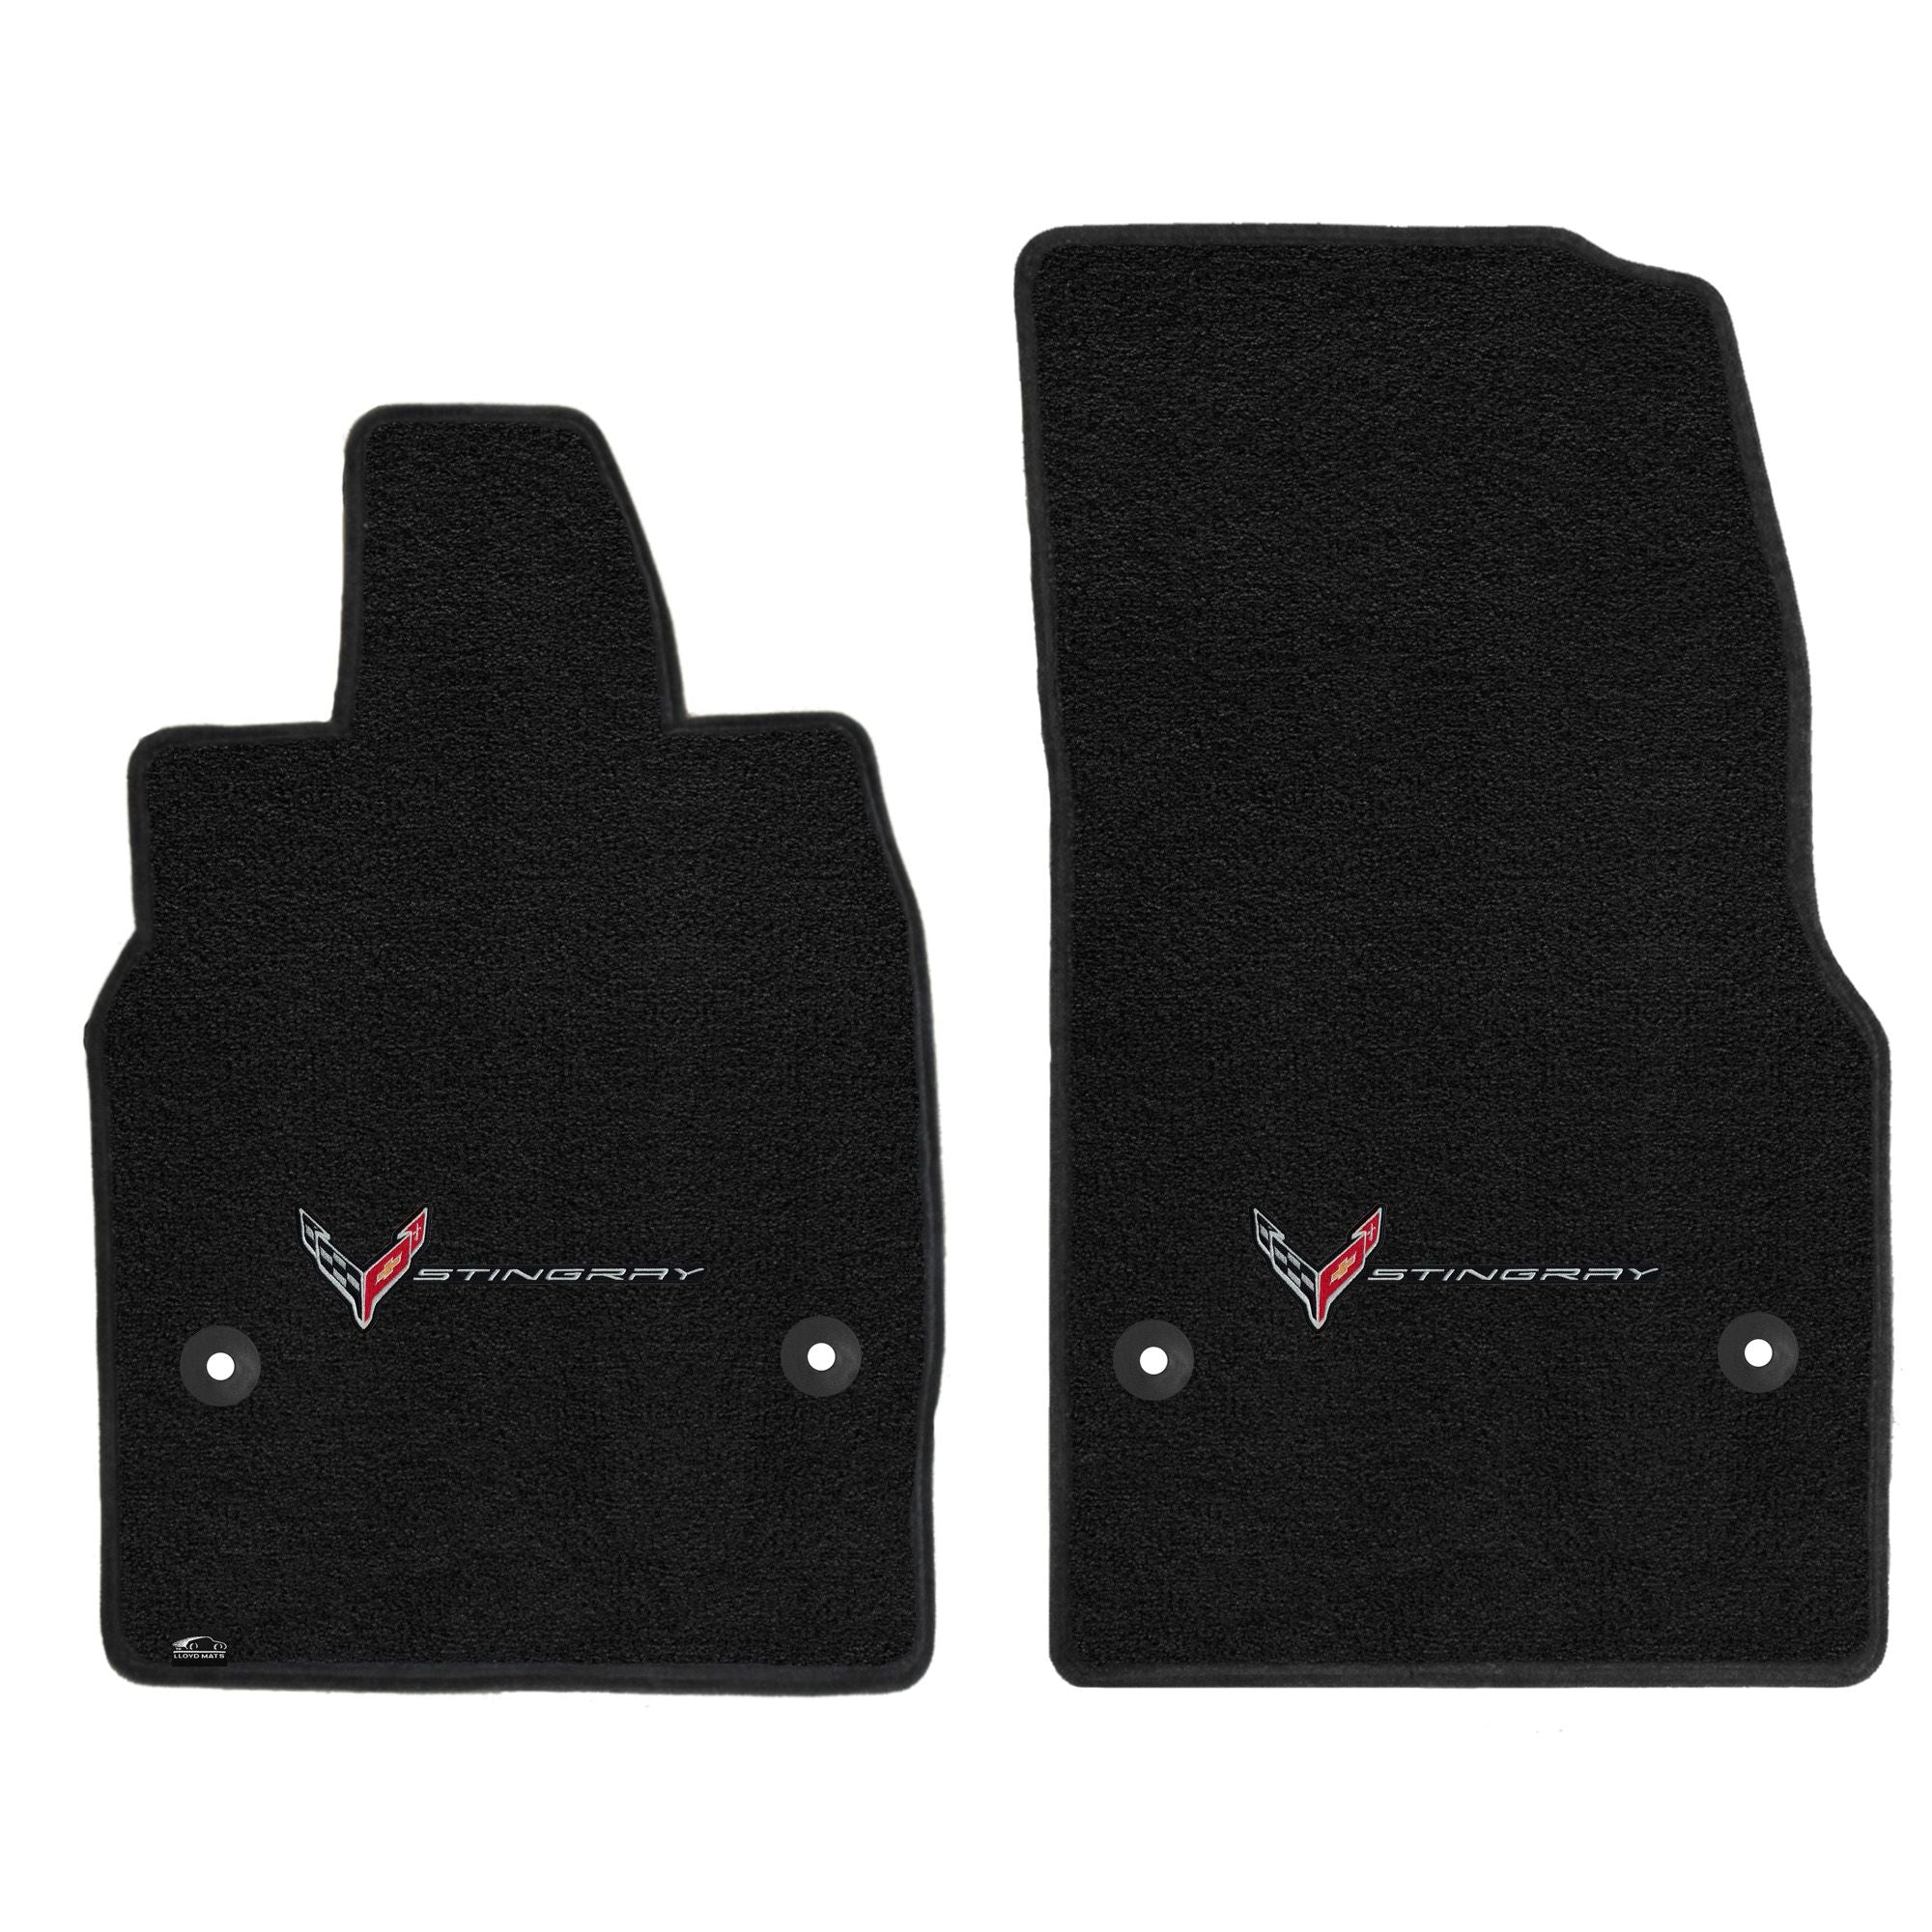 C8 Corvette Floor Mats - Lloyds Mats With Flags and Stingray Combo